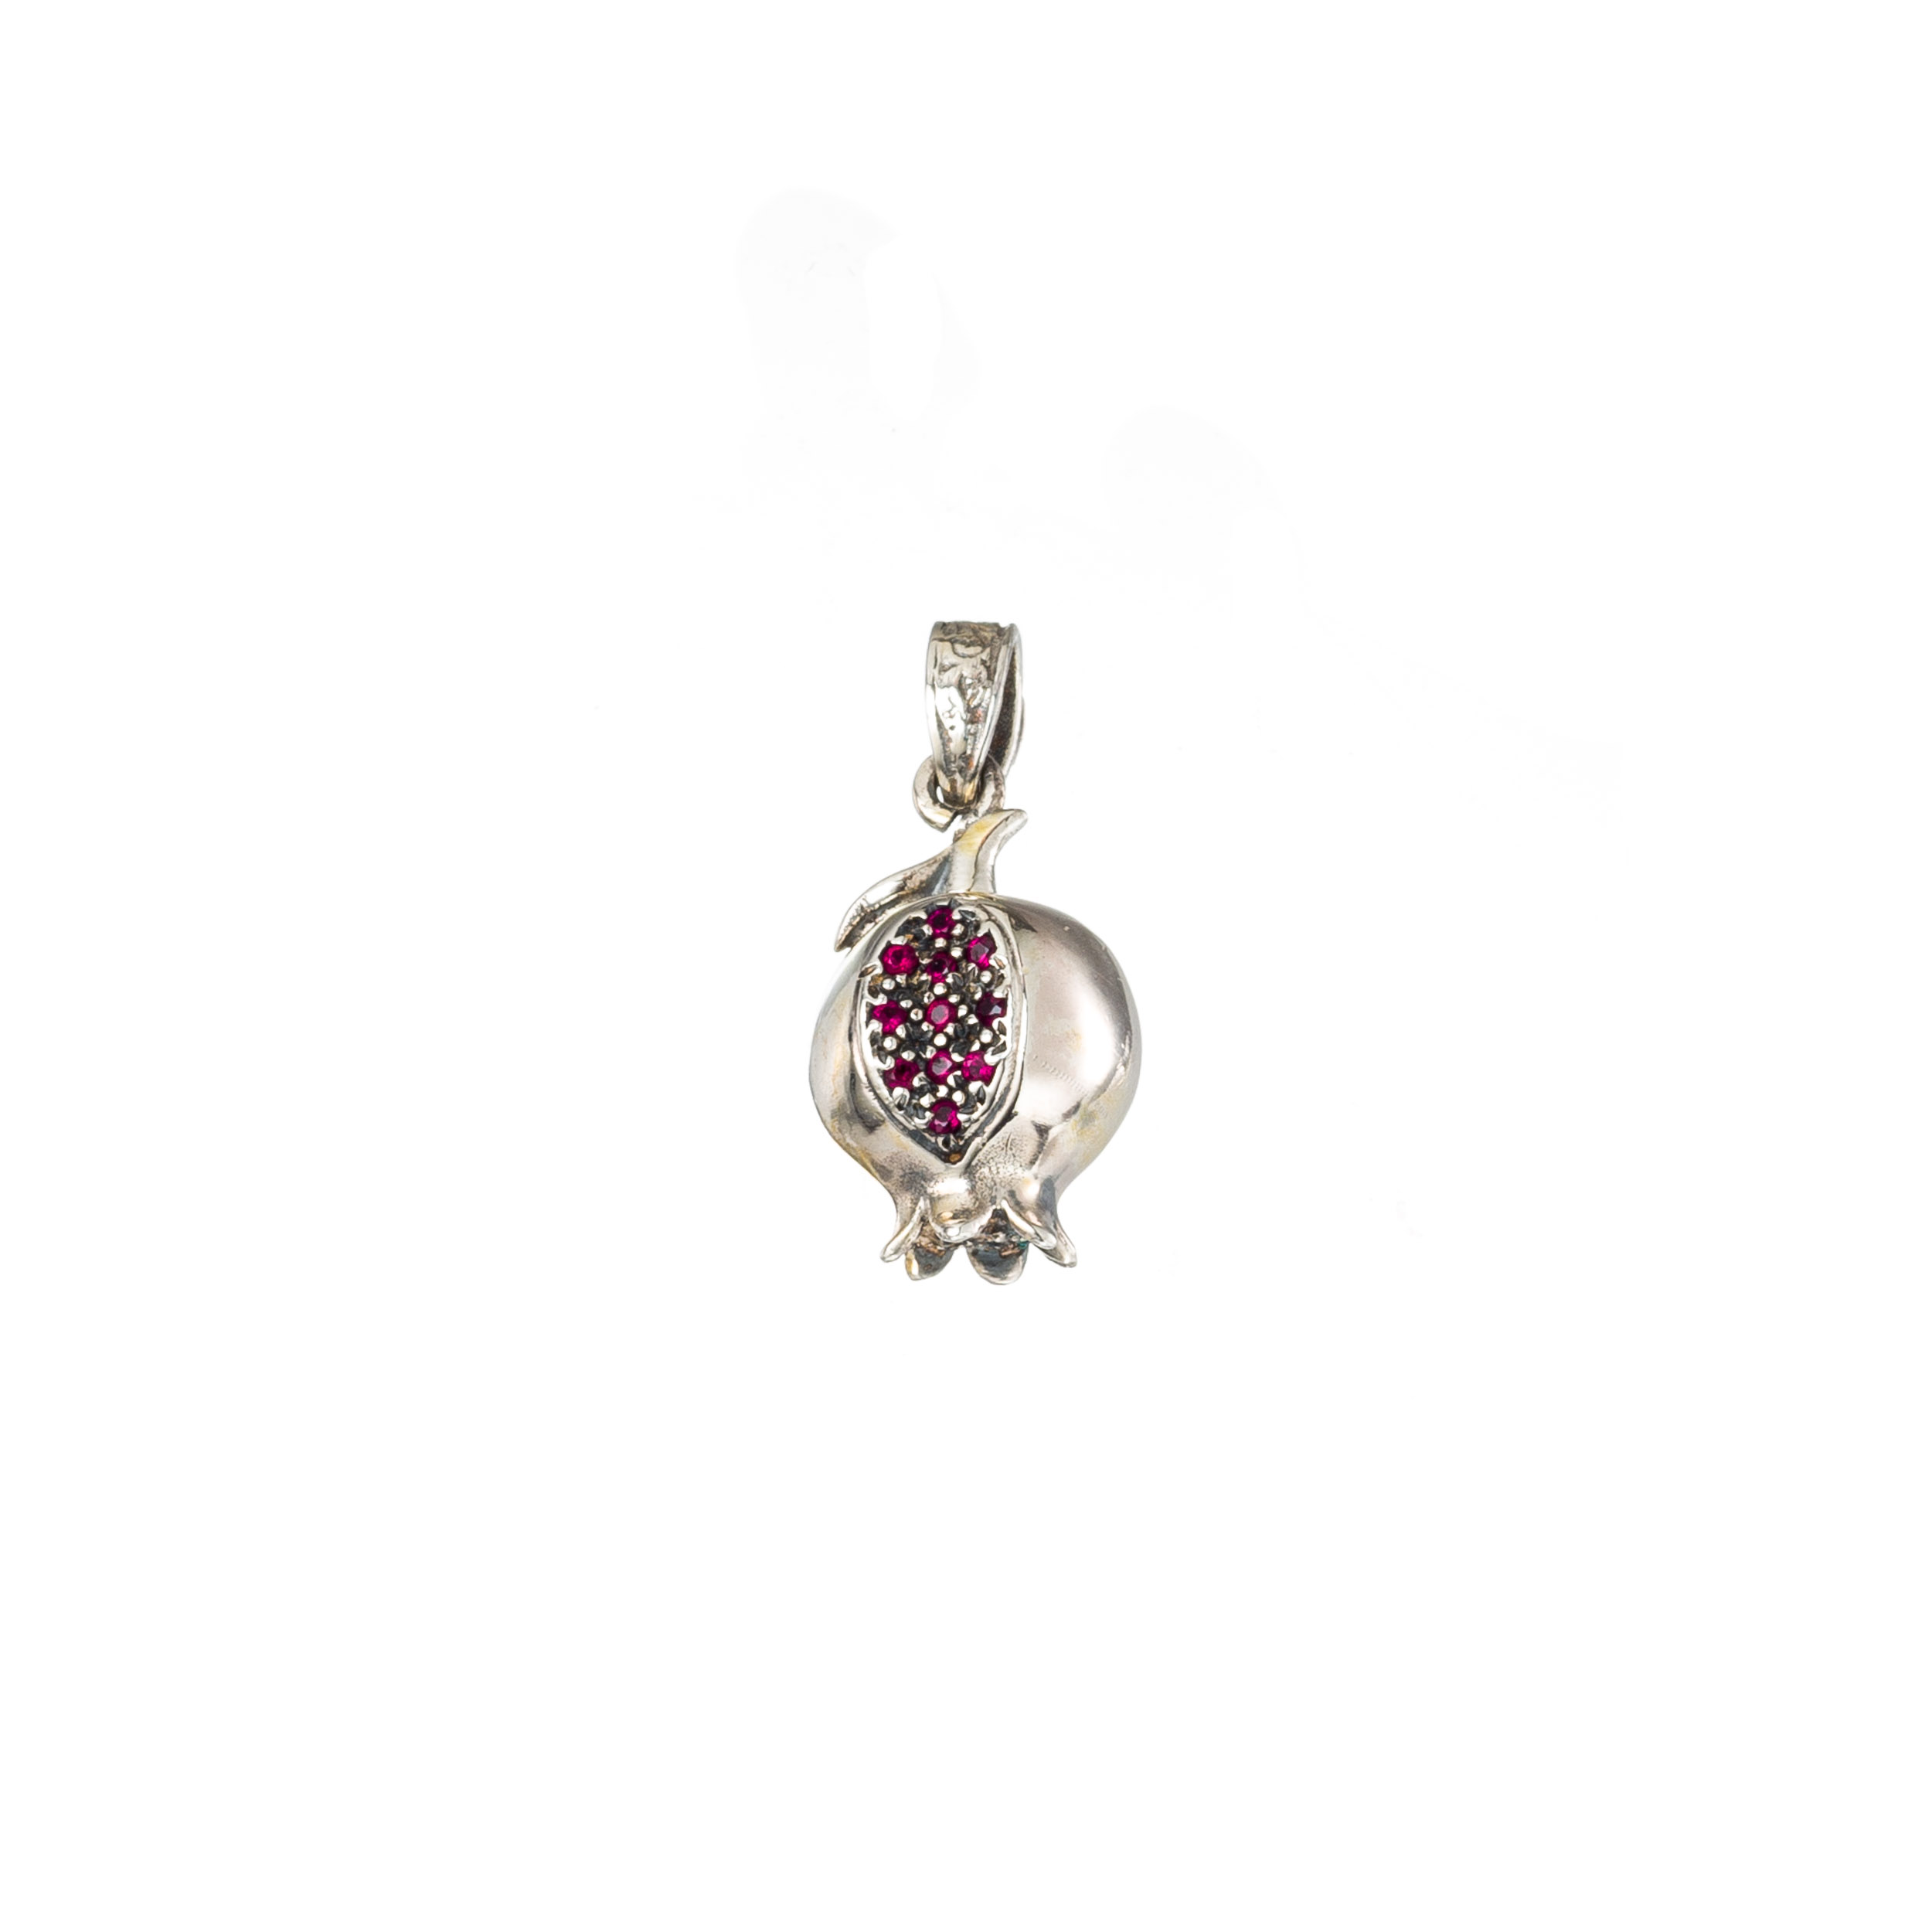 Pomegranate pendant in sterling silver with red CZ